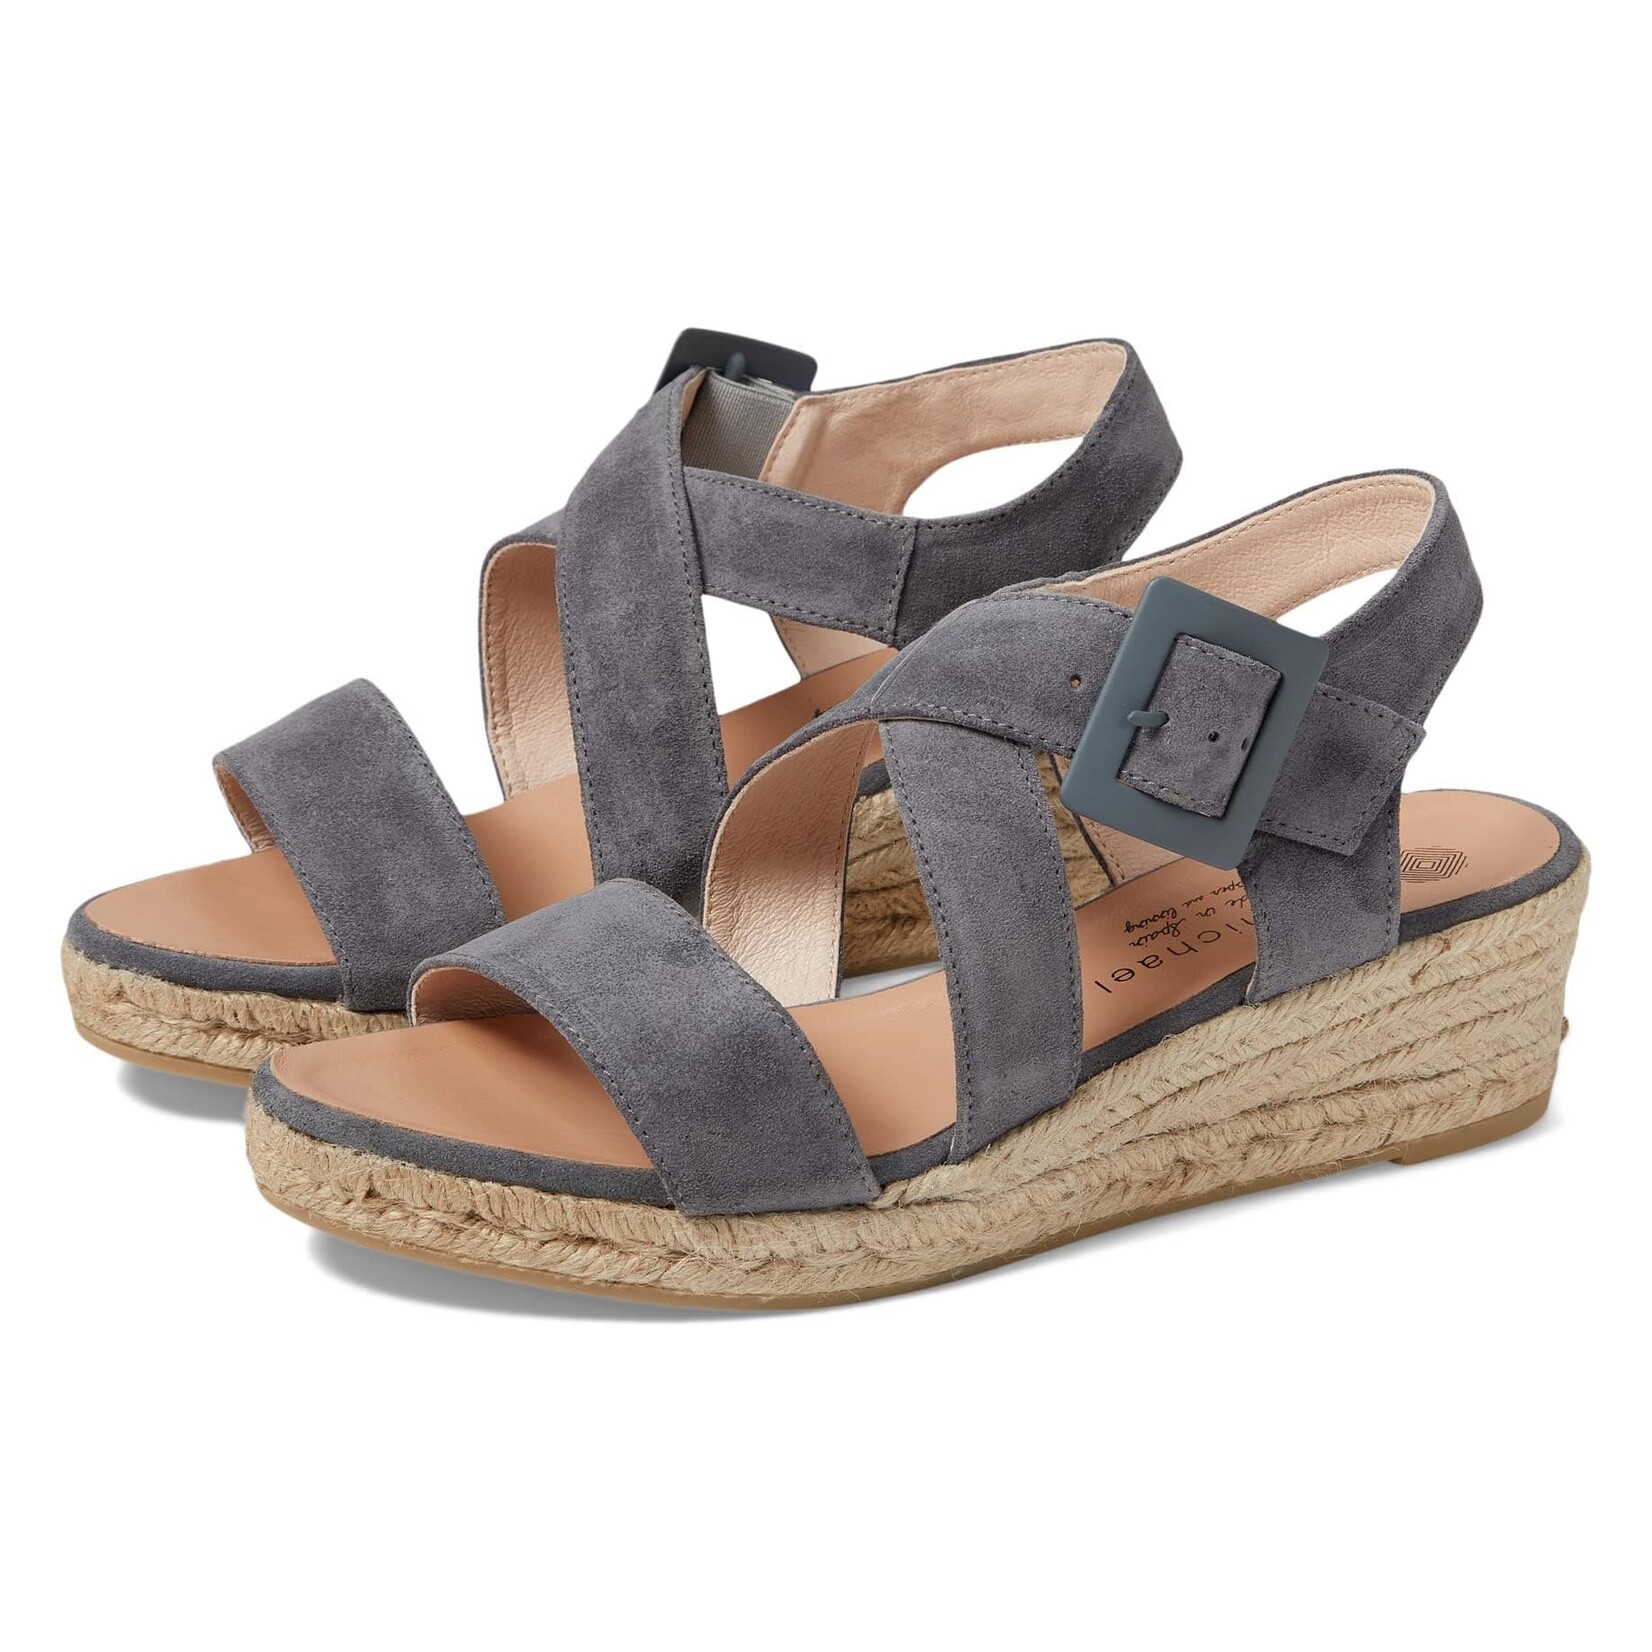 Eric Michael Lago by Eric Michael Baby Slate (Grey Blue) size 36 US 5.5-6 Only